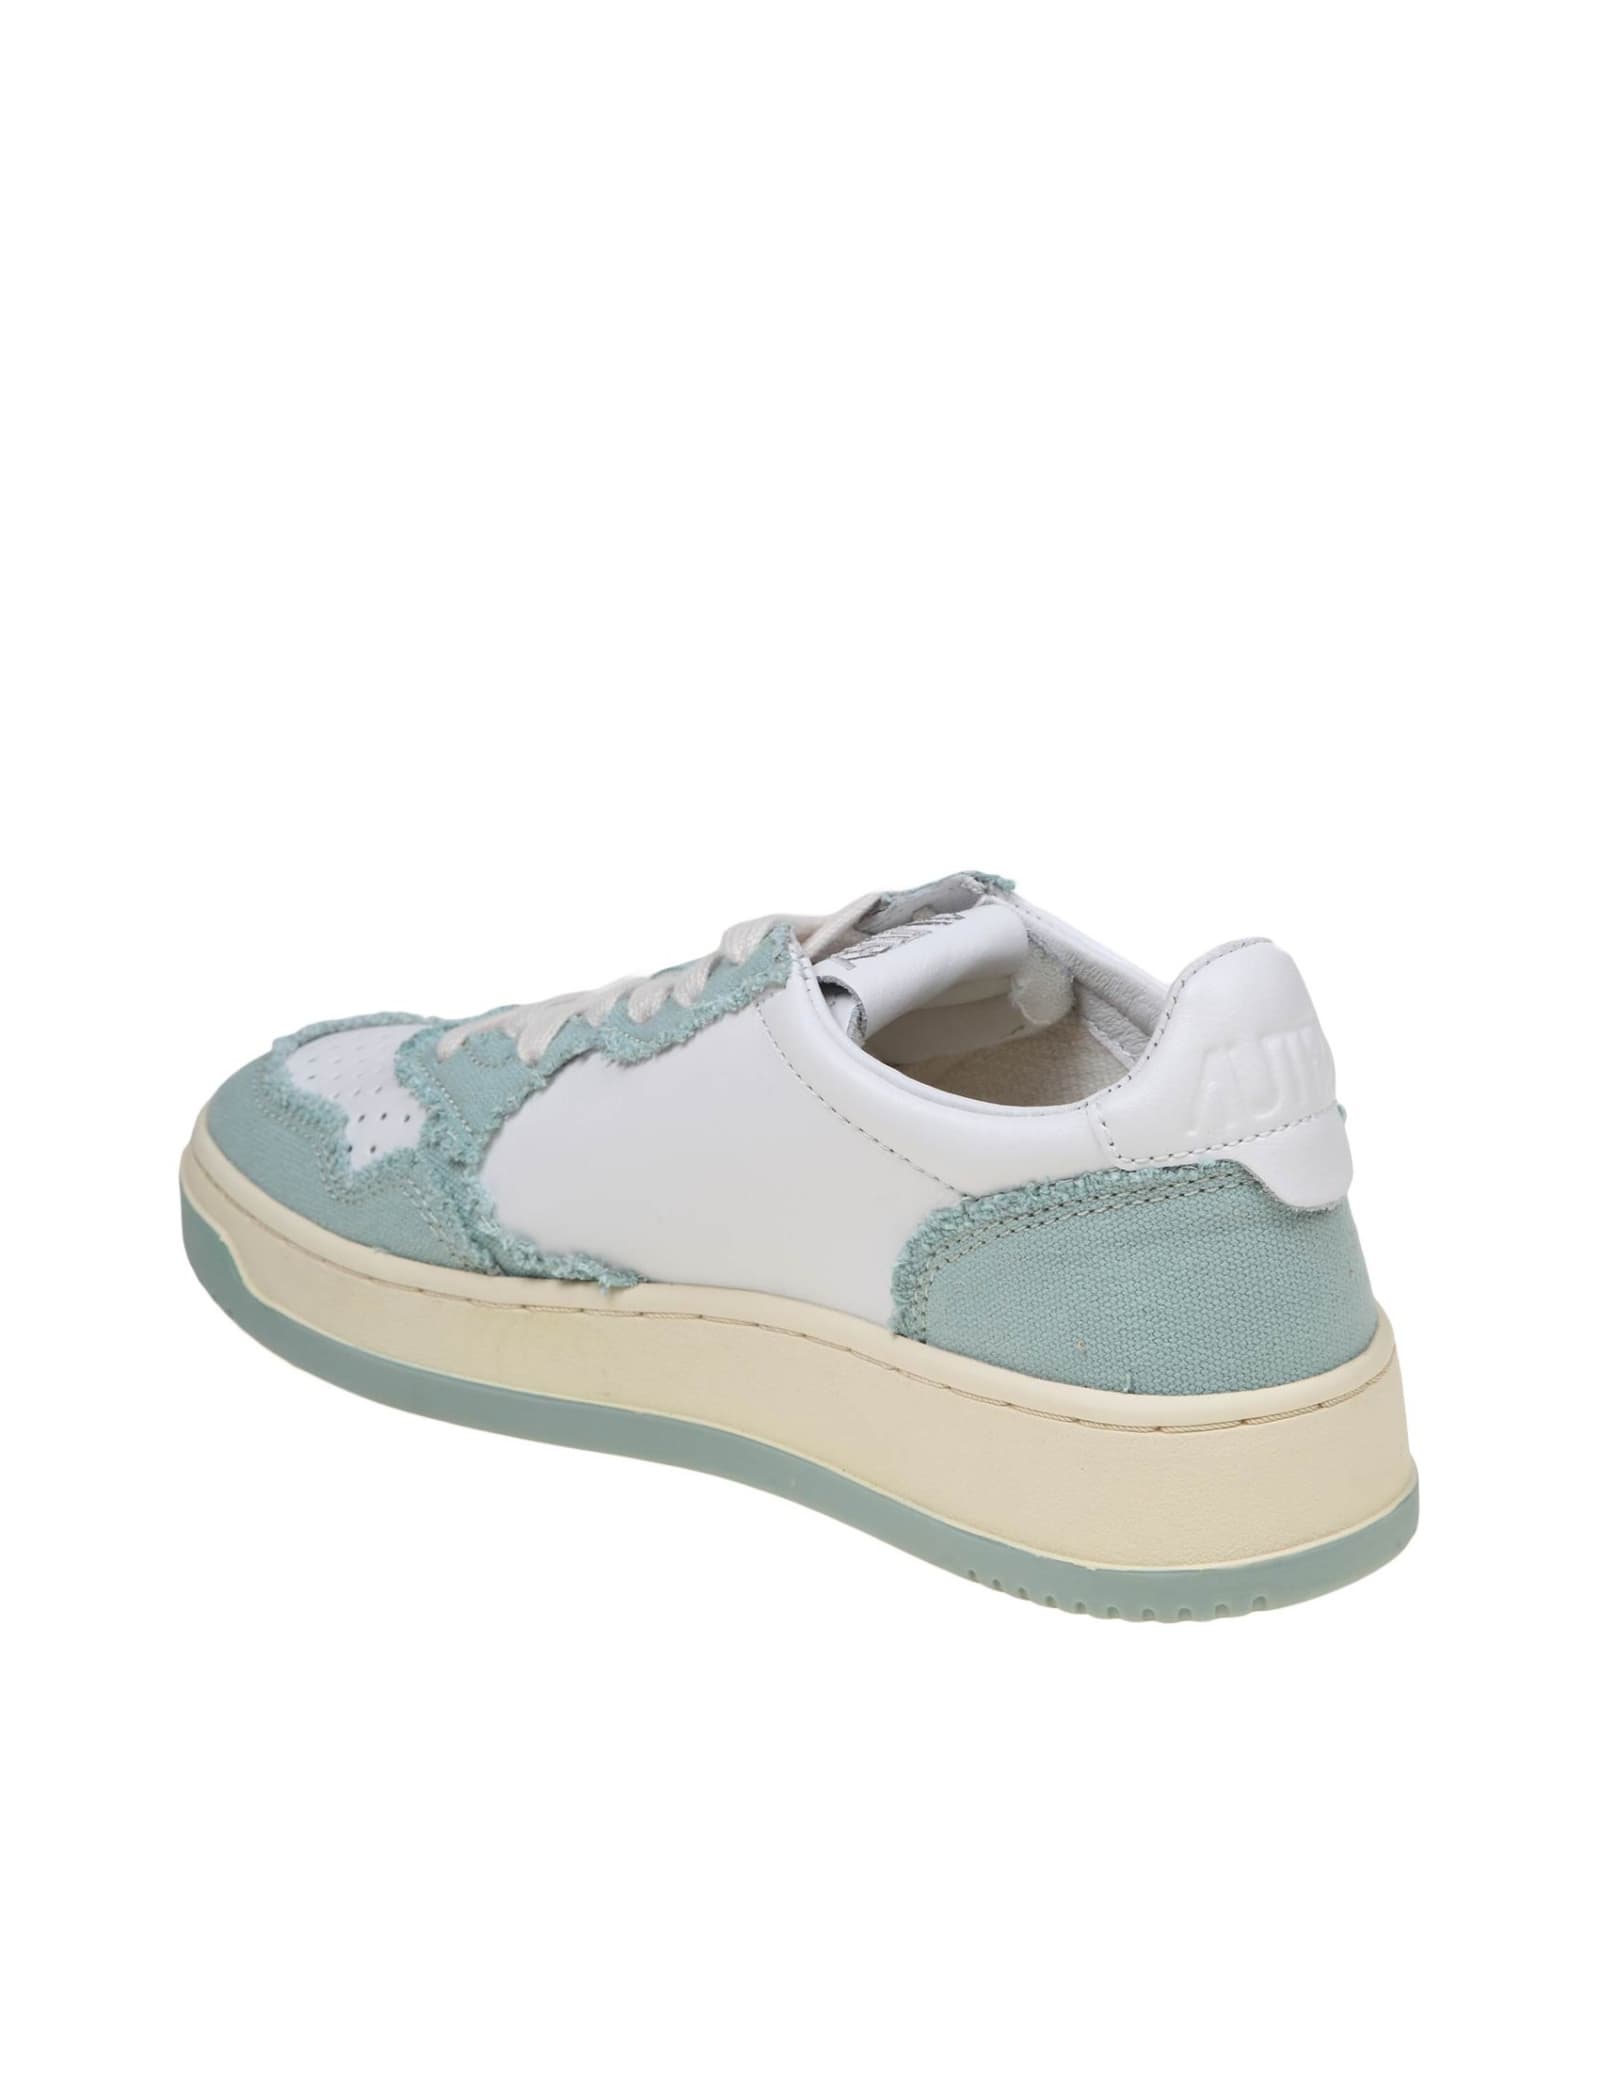 Shop Autry Sneakers In White And Light Blue Leather And Canvas In White/blu